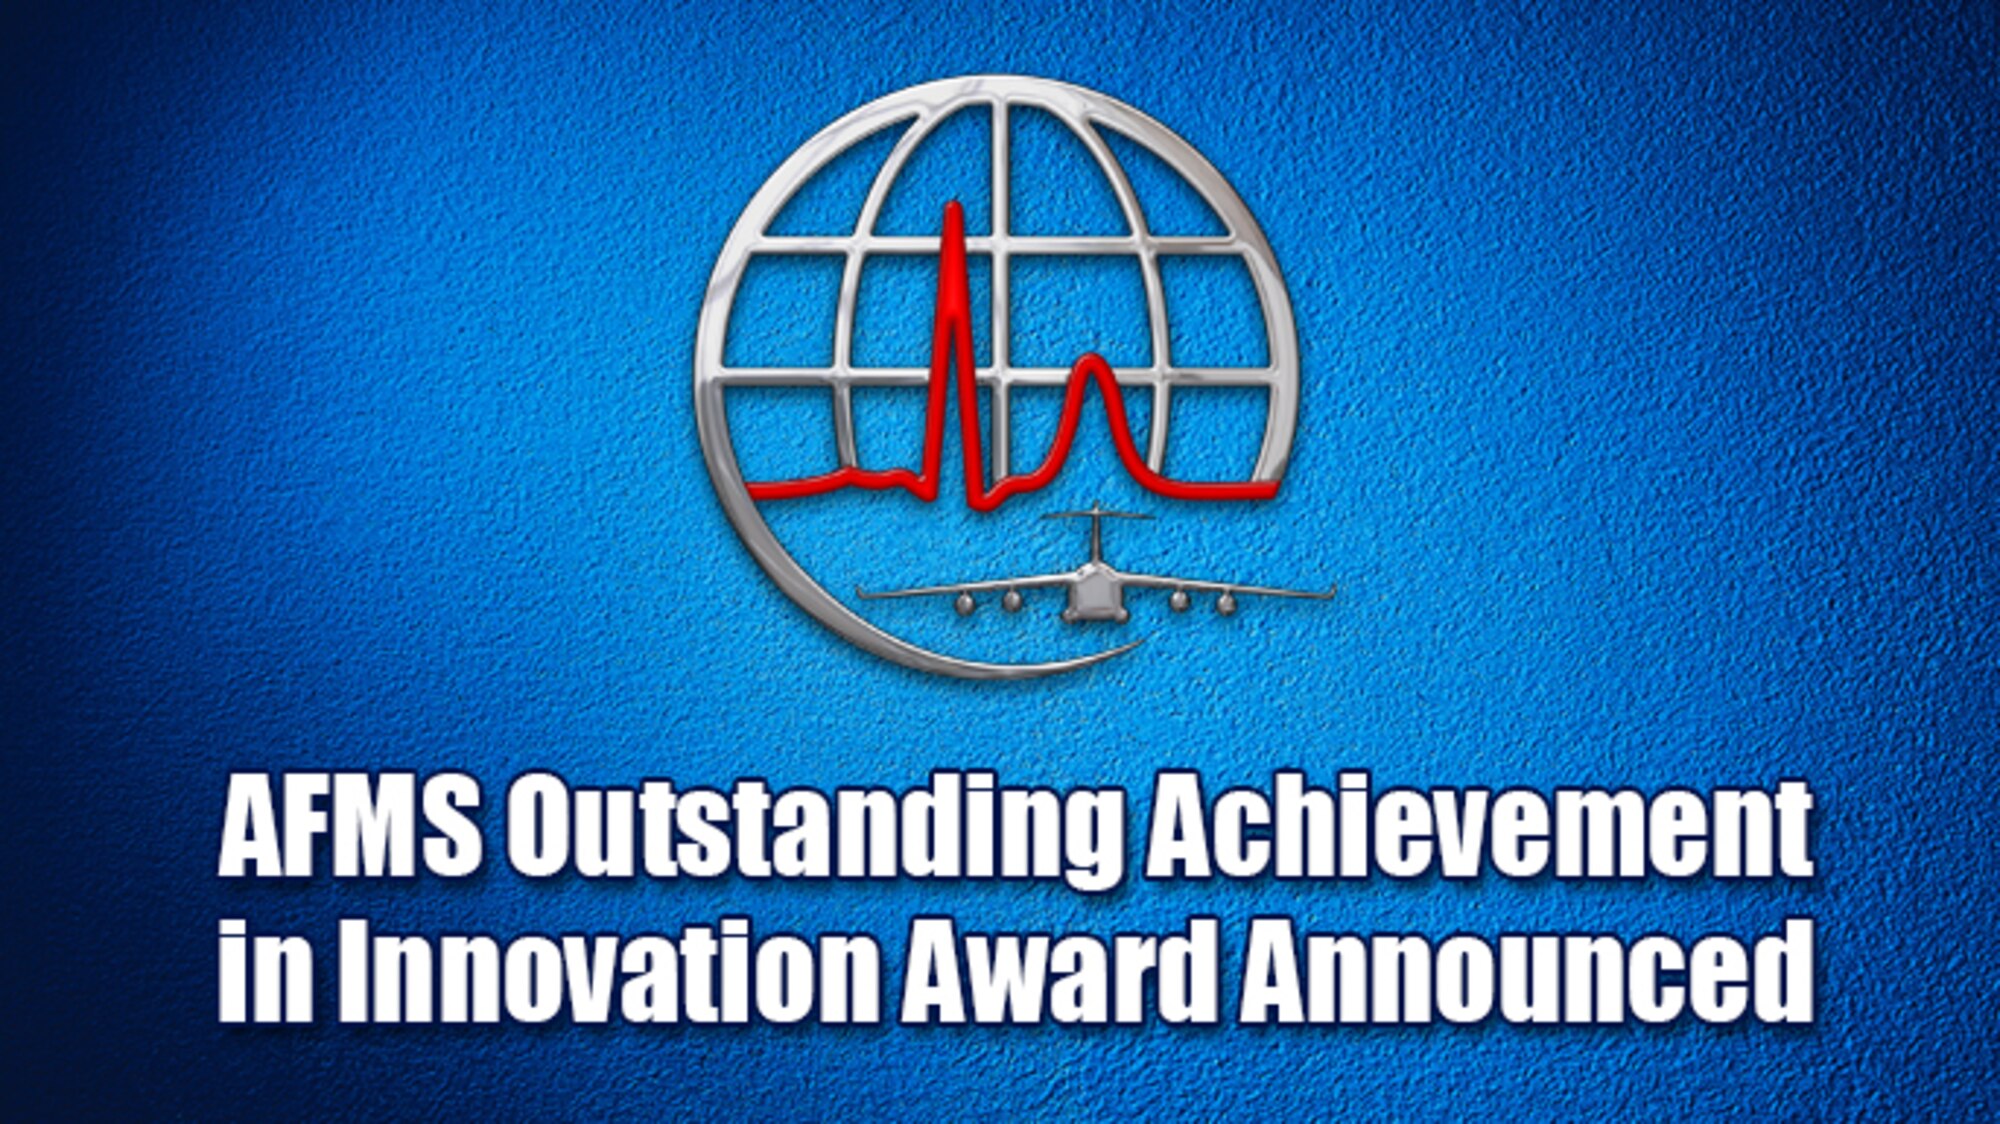 AFMS outstanding achievement in innovation award announced